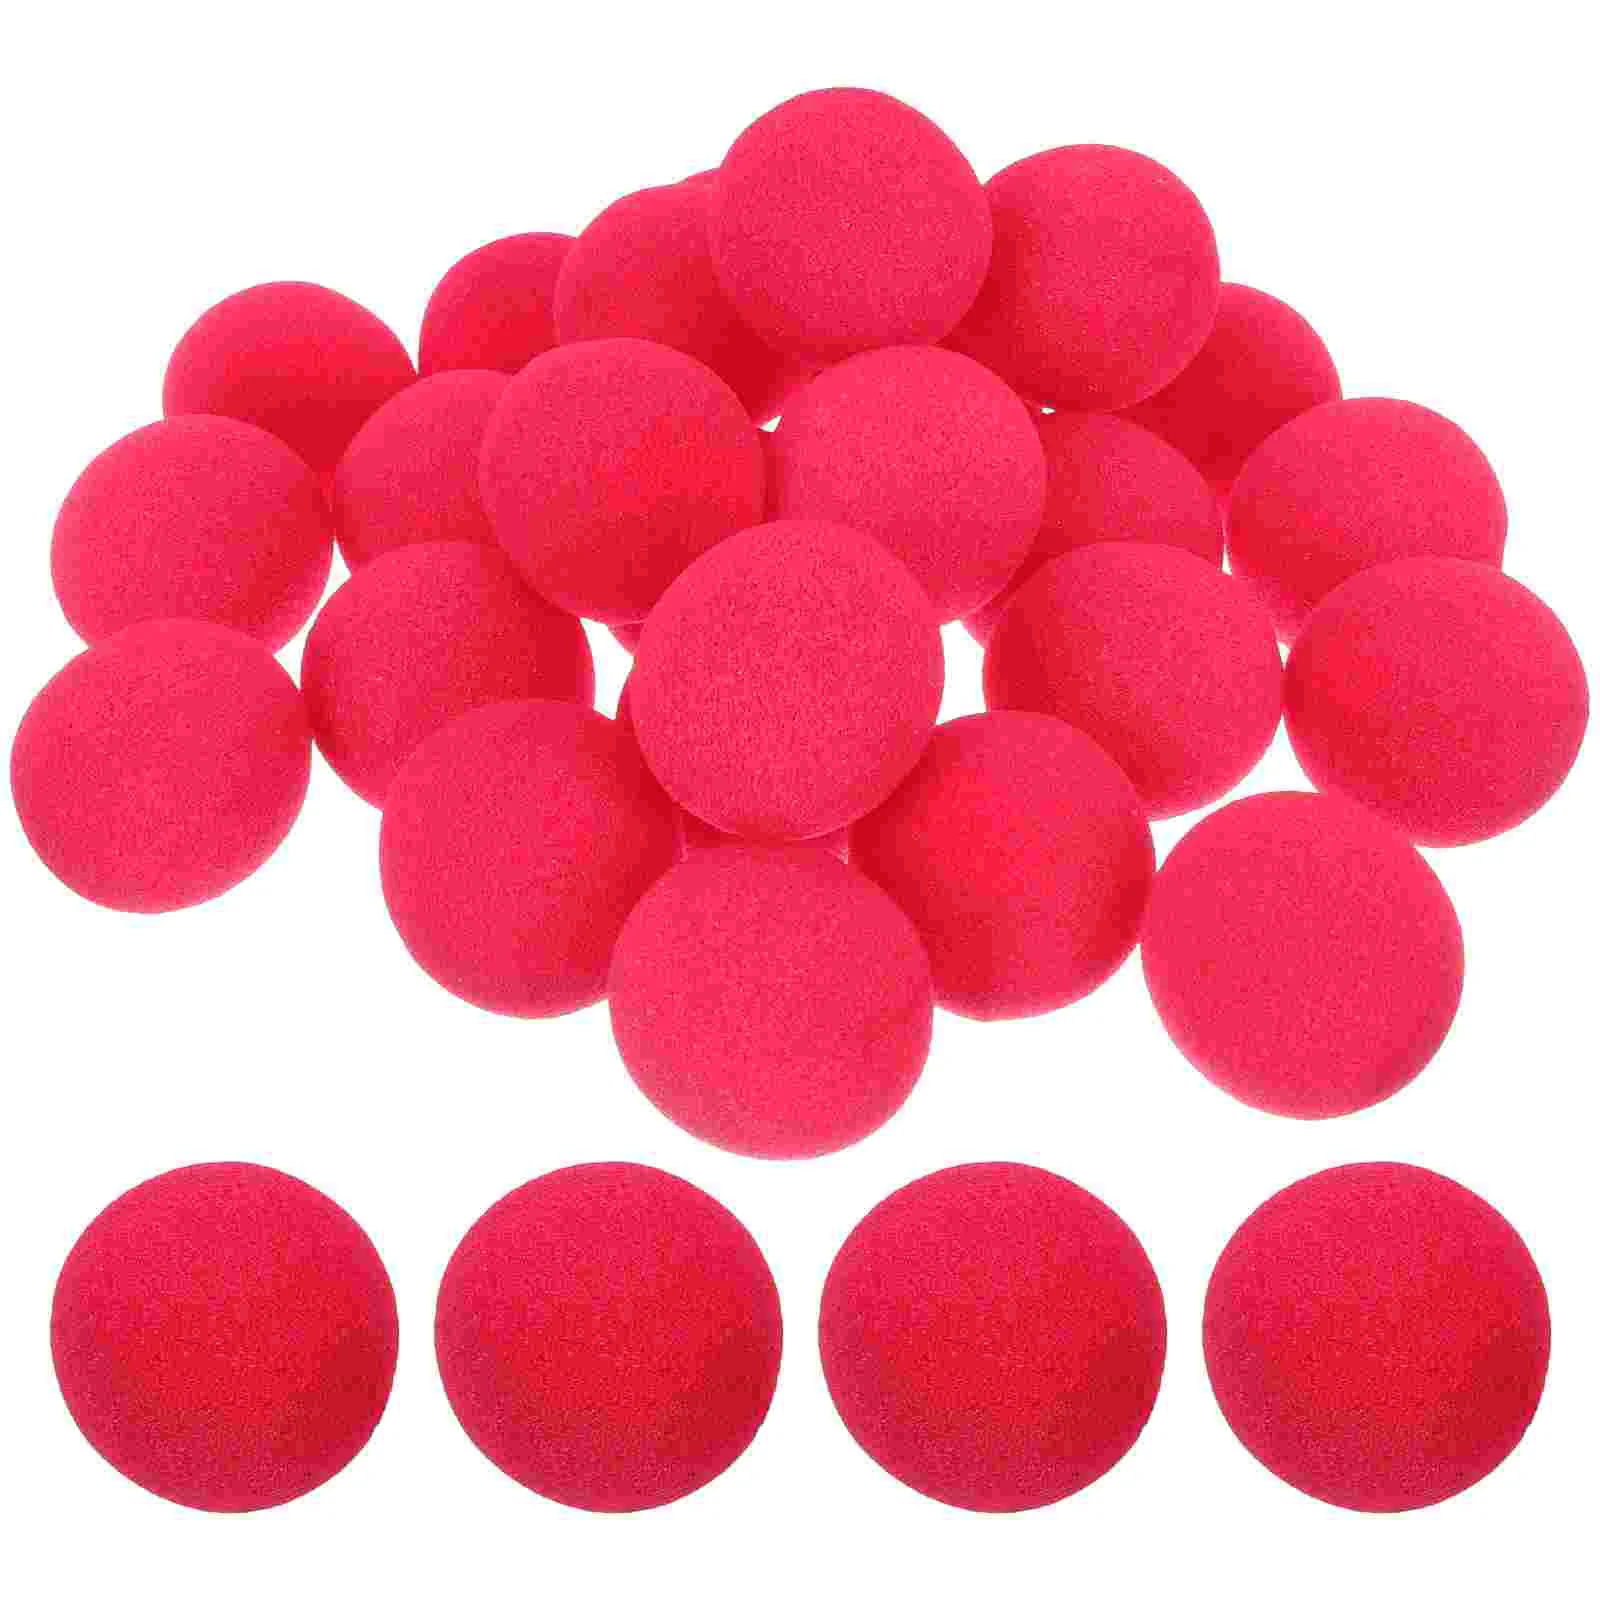 

25 Pcs Foam Nose Party Sponge Carnival Red Decor Supply Compact Circus Noses Clown Portable Ball Prop